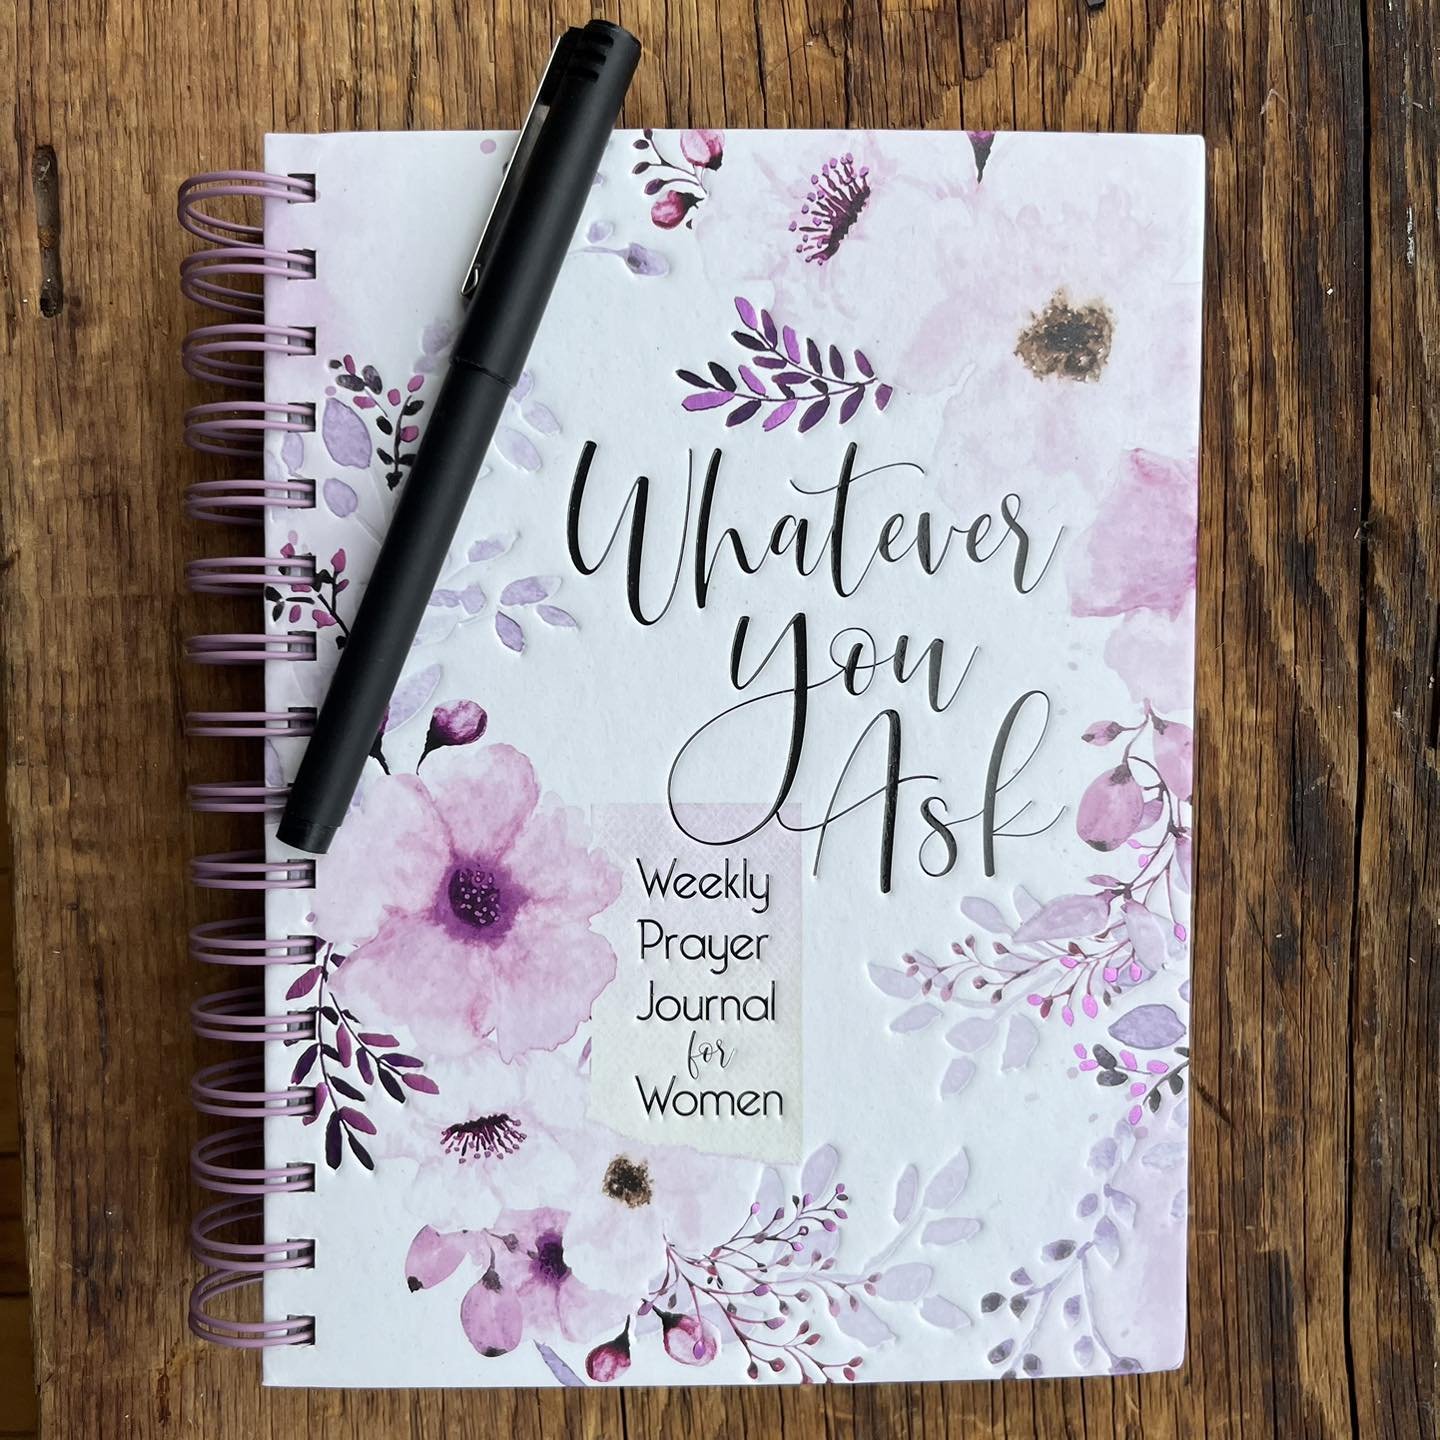 A thoughtful journal for Mom is always a good idea. 💡 ✍️ 🌸 
.
.
.
.
#mnsmallbiz #mnshopsmall #leader1918 #mnboutique #midweststyle #boutique #mnlocalbusiness #cambridgemn #mnlocal #mnretail #mnshop #myleaderstyle #boutiqueshopping #mnsmallbusiness 